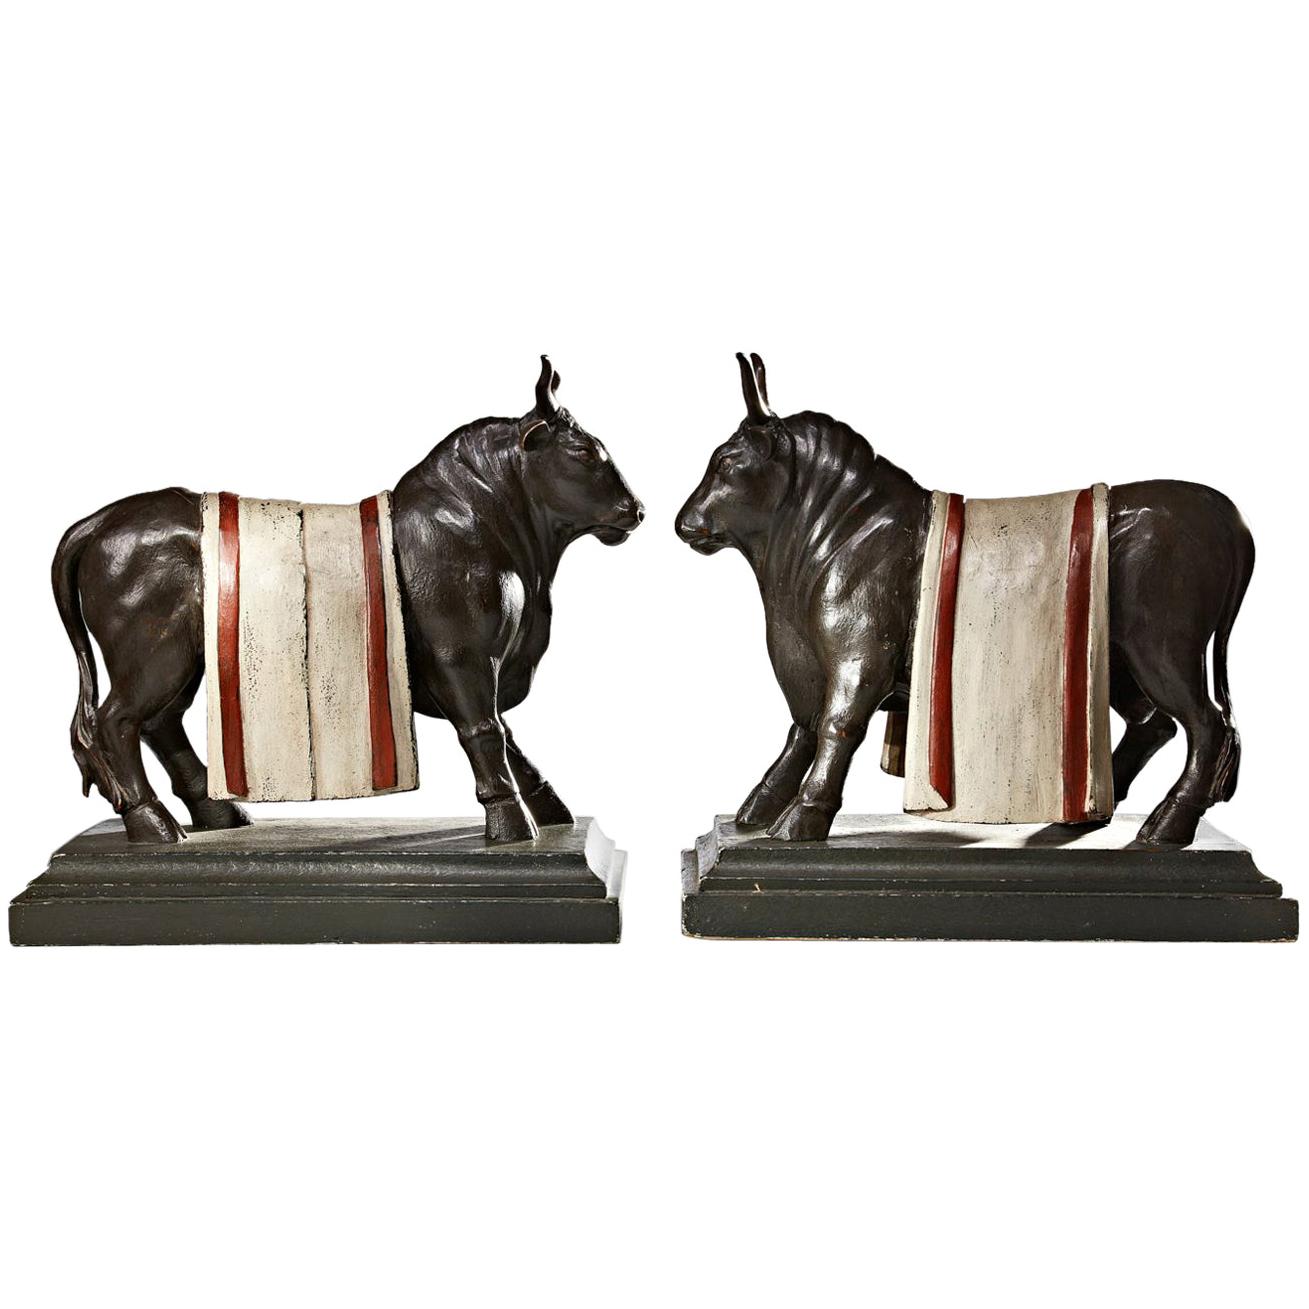 Pair of Carved Wooden Bull Sculptures Europe Circa 1840 For Sale